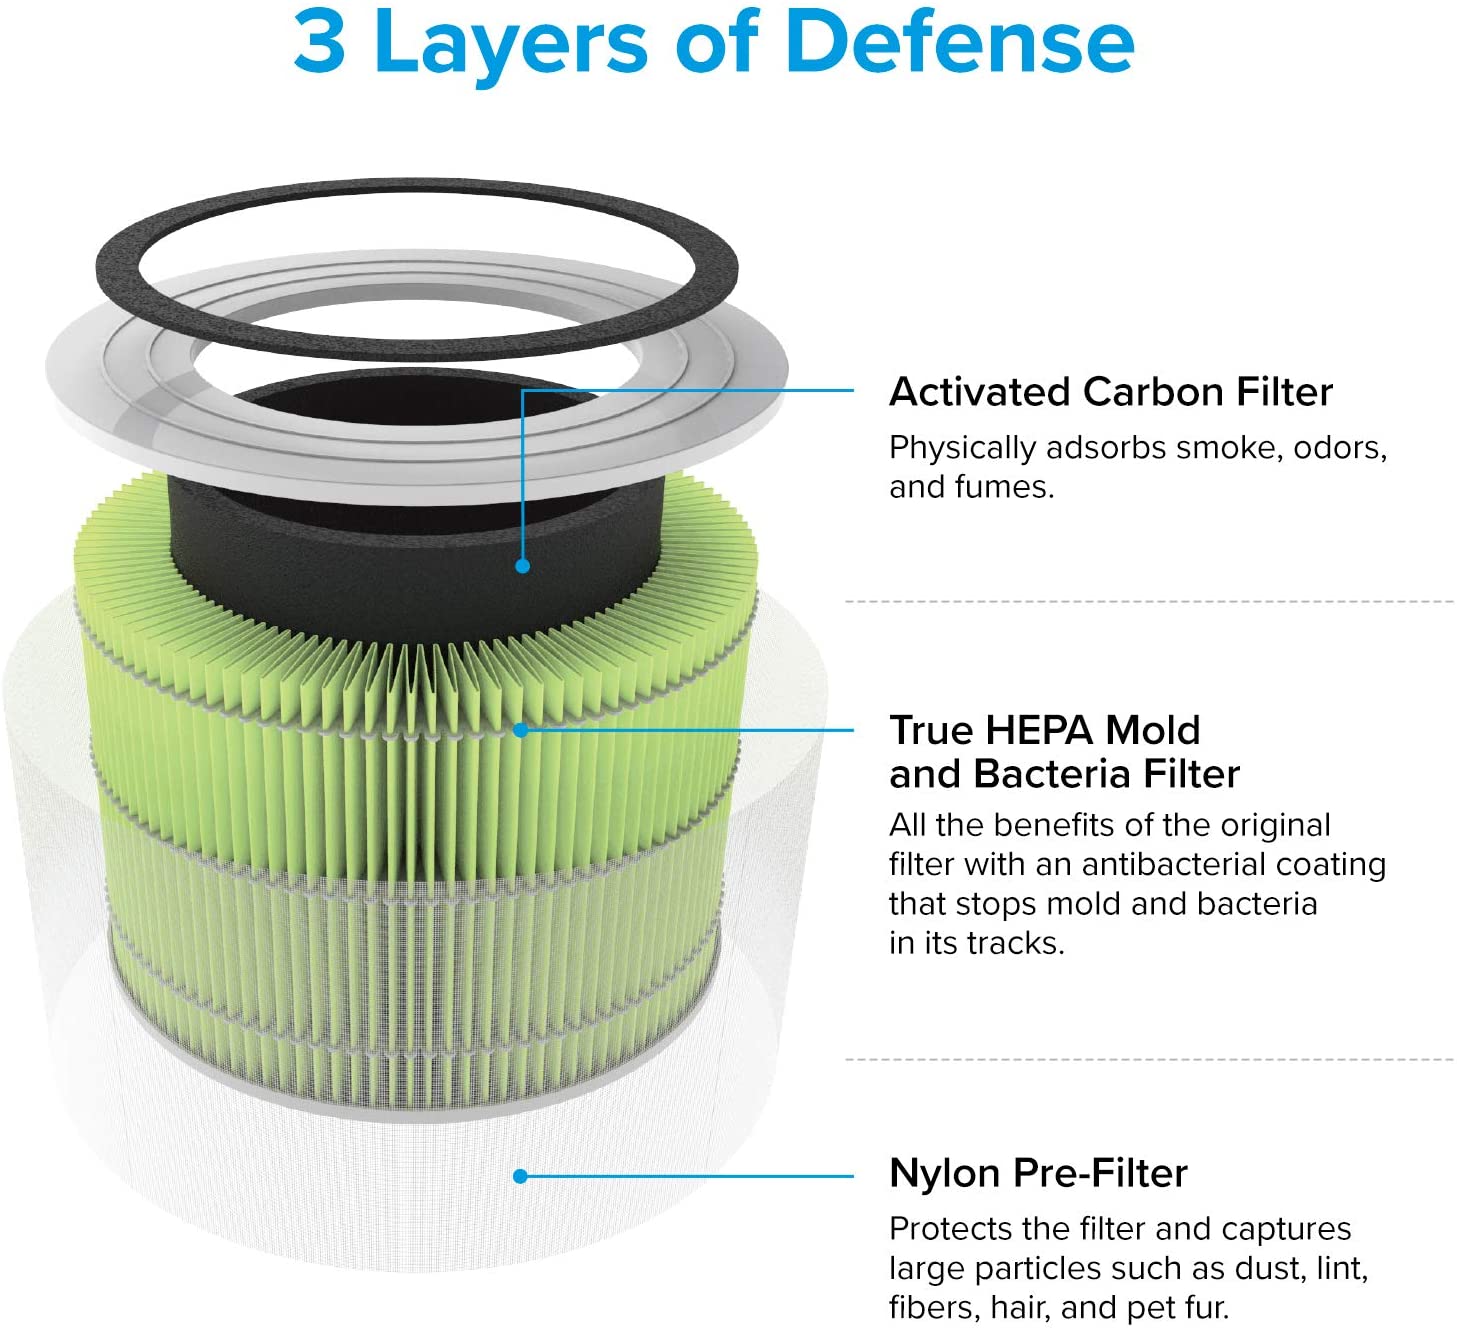 Levoit Core® 300 3-Stage Toxin Absorber Filter